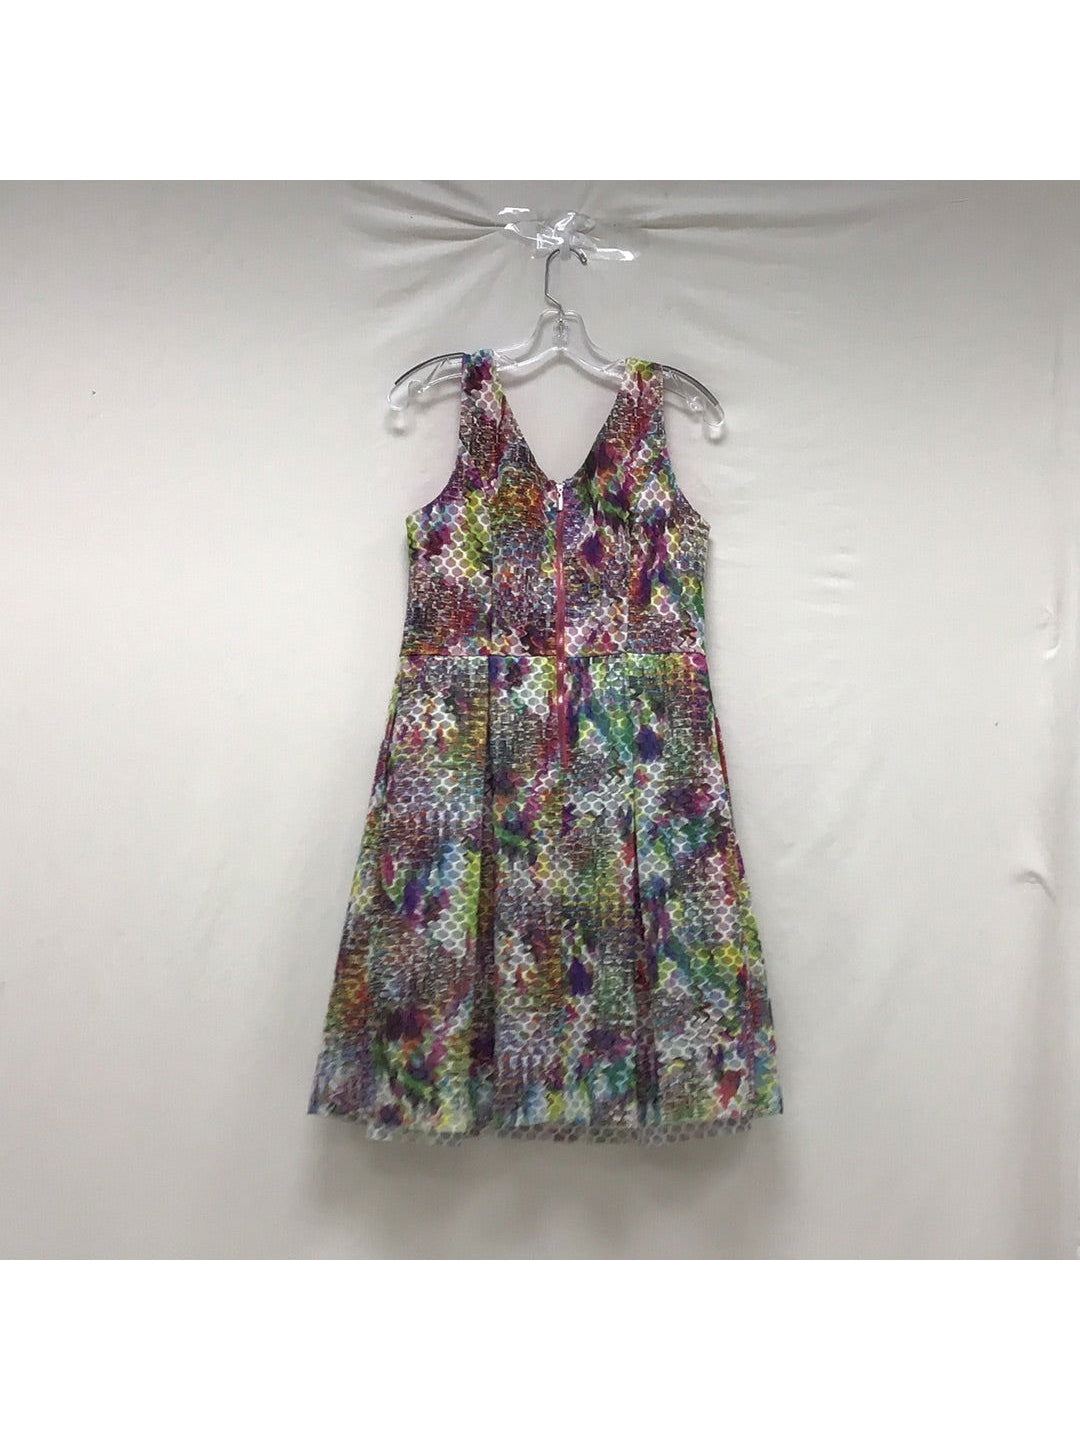 Women's New York & Co Multicolor Floral with Pockets Sleeveless Dress Size 8 - The Kennedy Collective Thrift - 